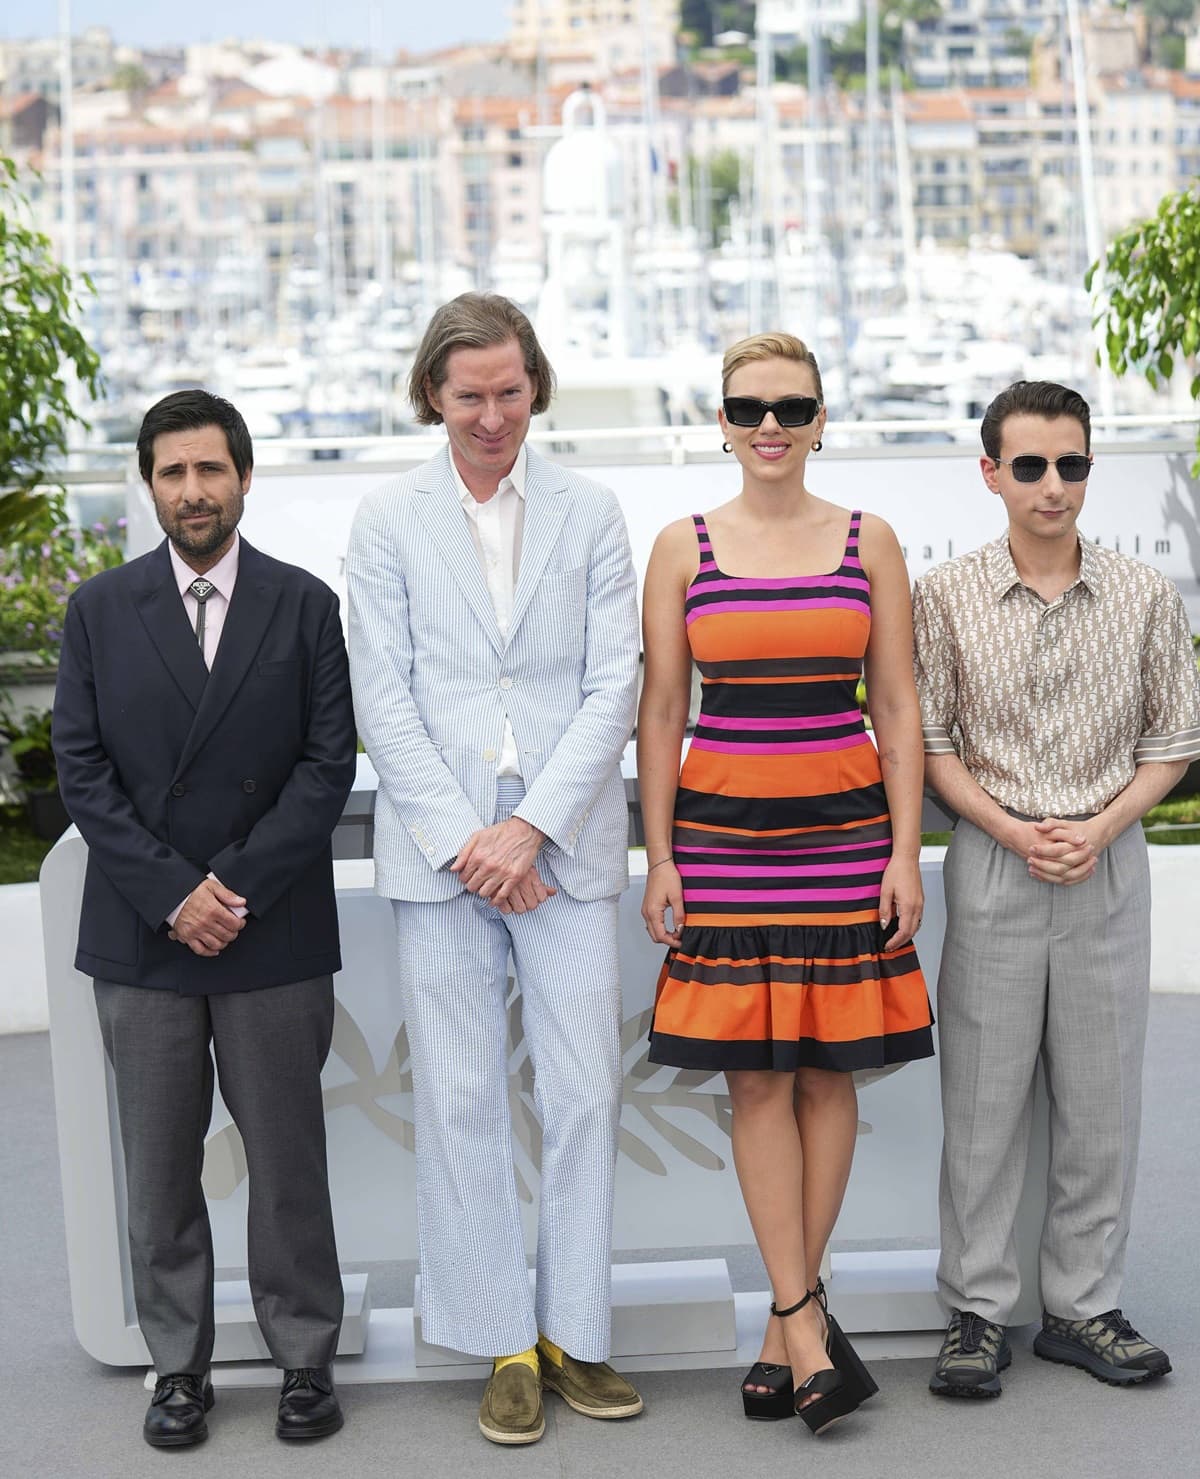 Jason Schwartzman, Wes Anderson, Scarlett Johansson, and Jake Ryan at the "Asteroid City" Photocall at the 76th Cannes Film Festival